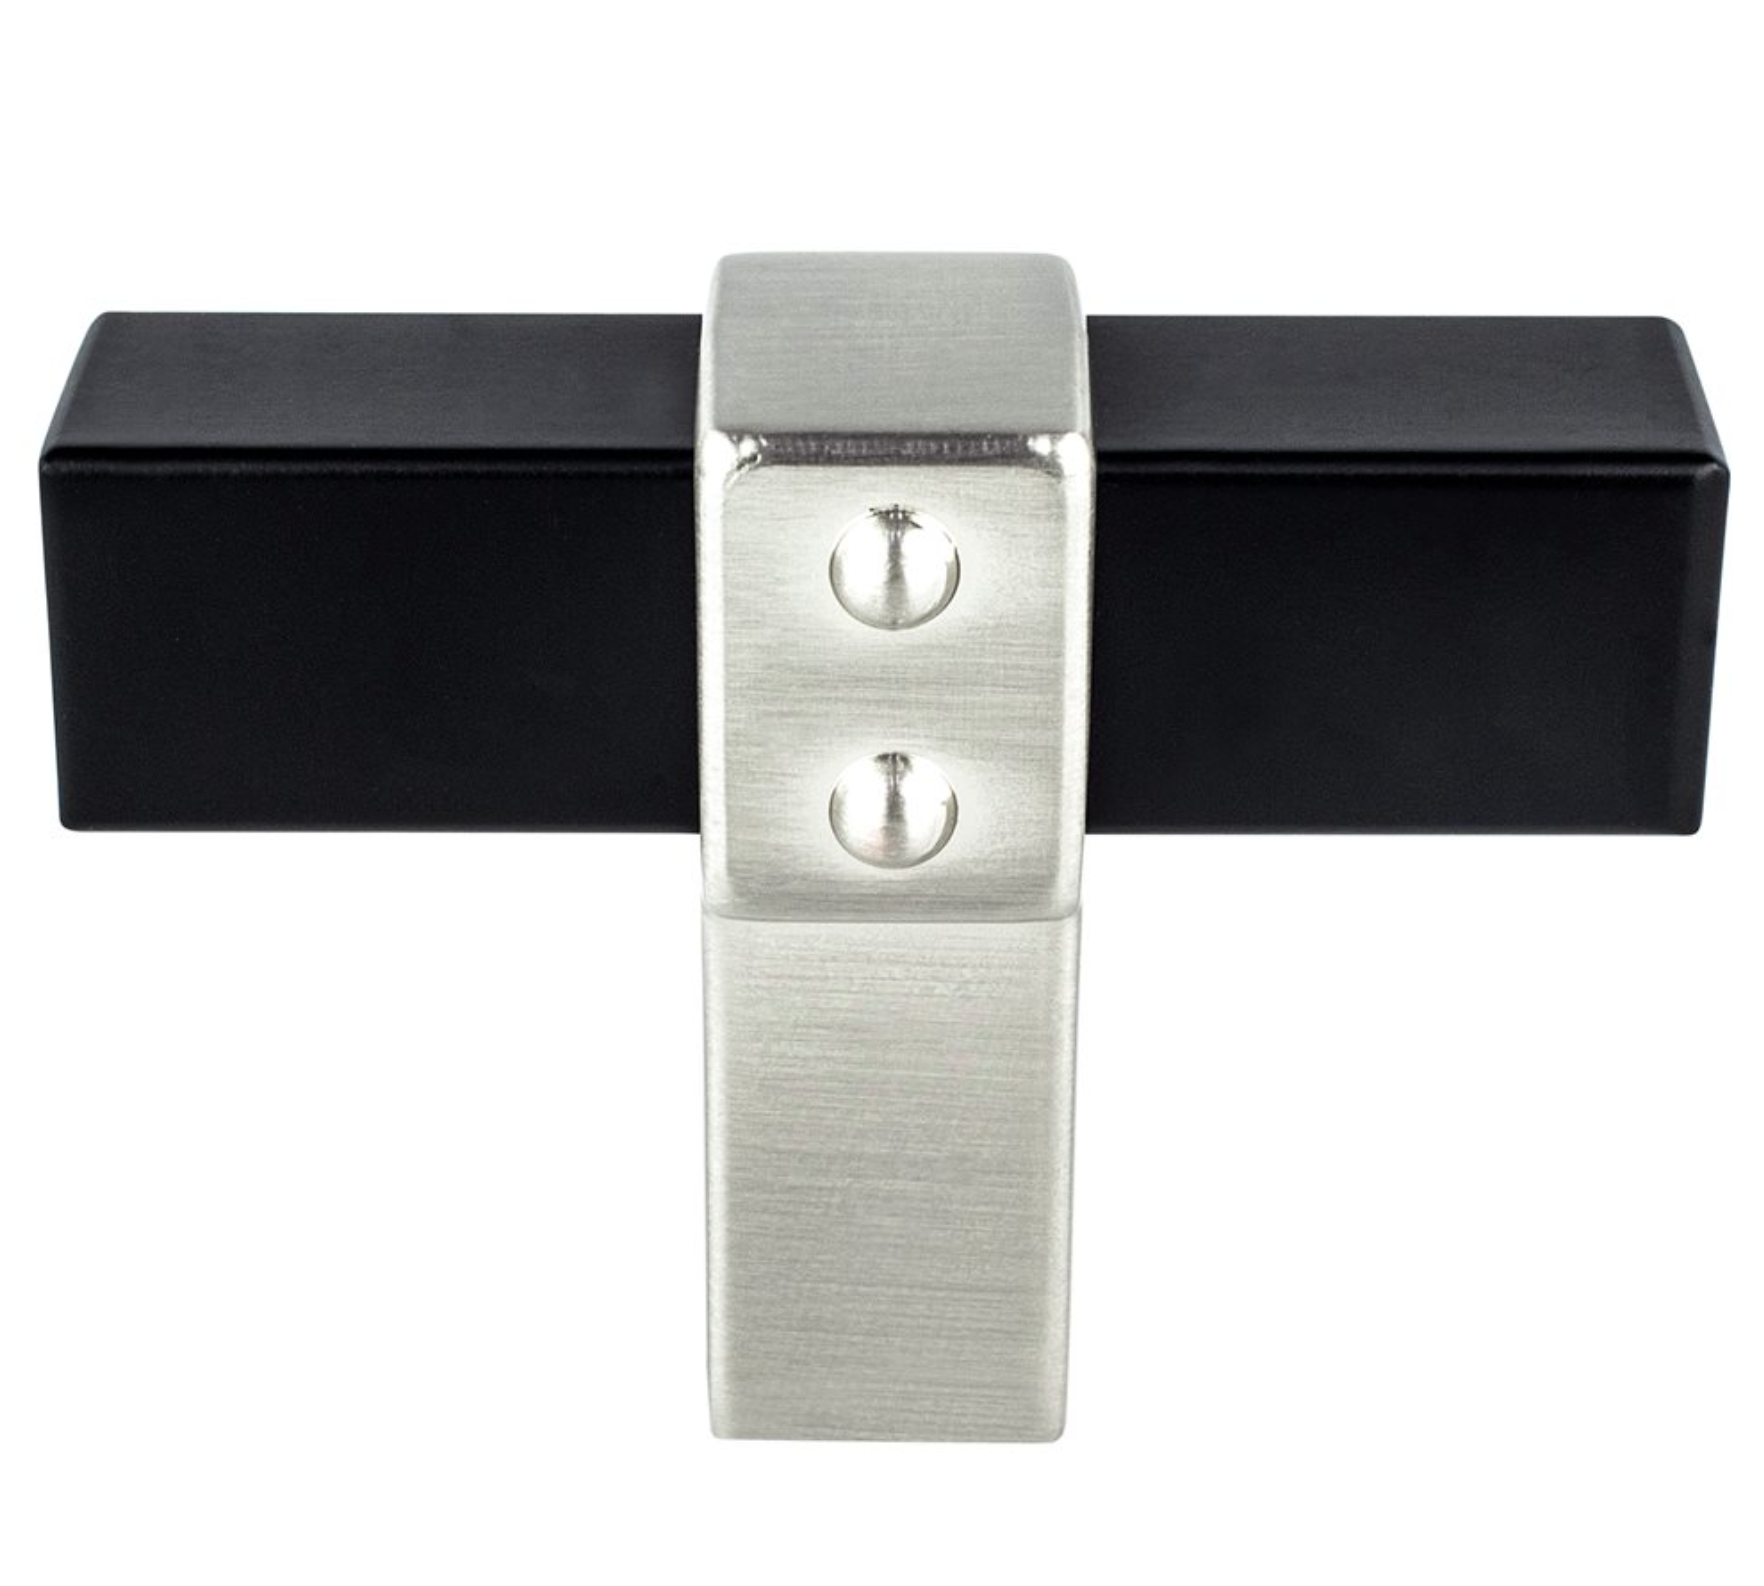 Brushed Nickel and Matte Black "Rio" Dual-Finish Cabinet Knob and Drawer Pulls - Industry Hardware